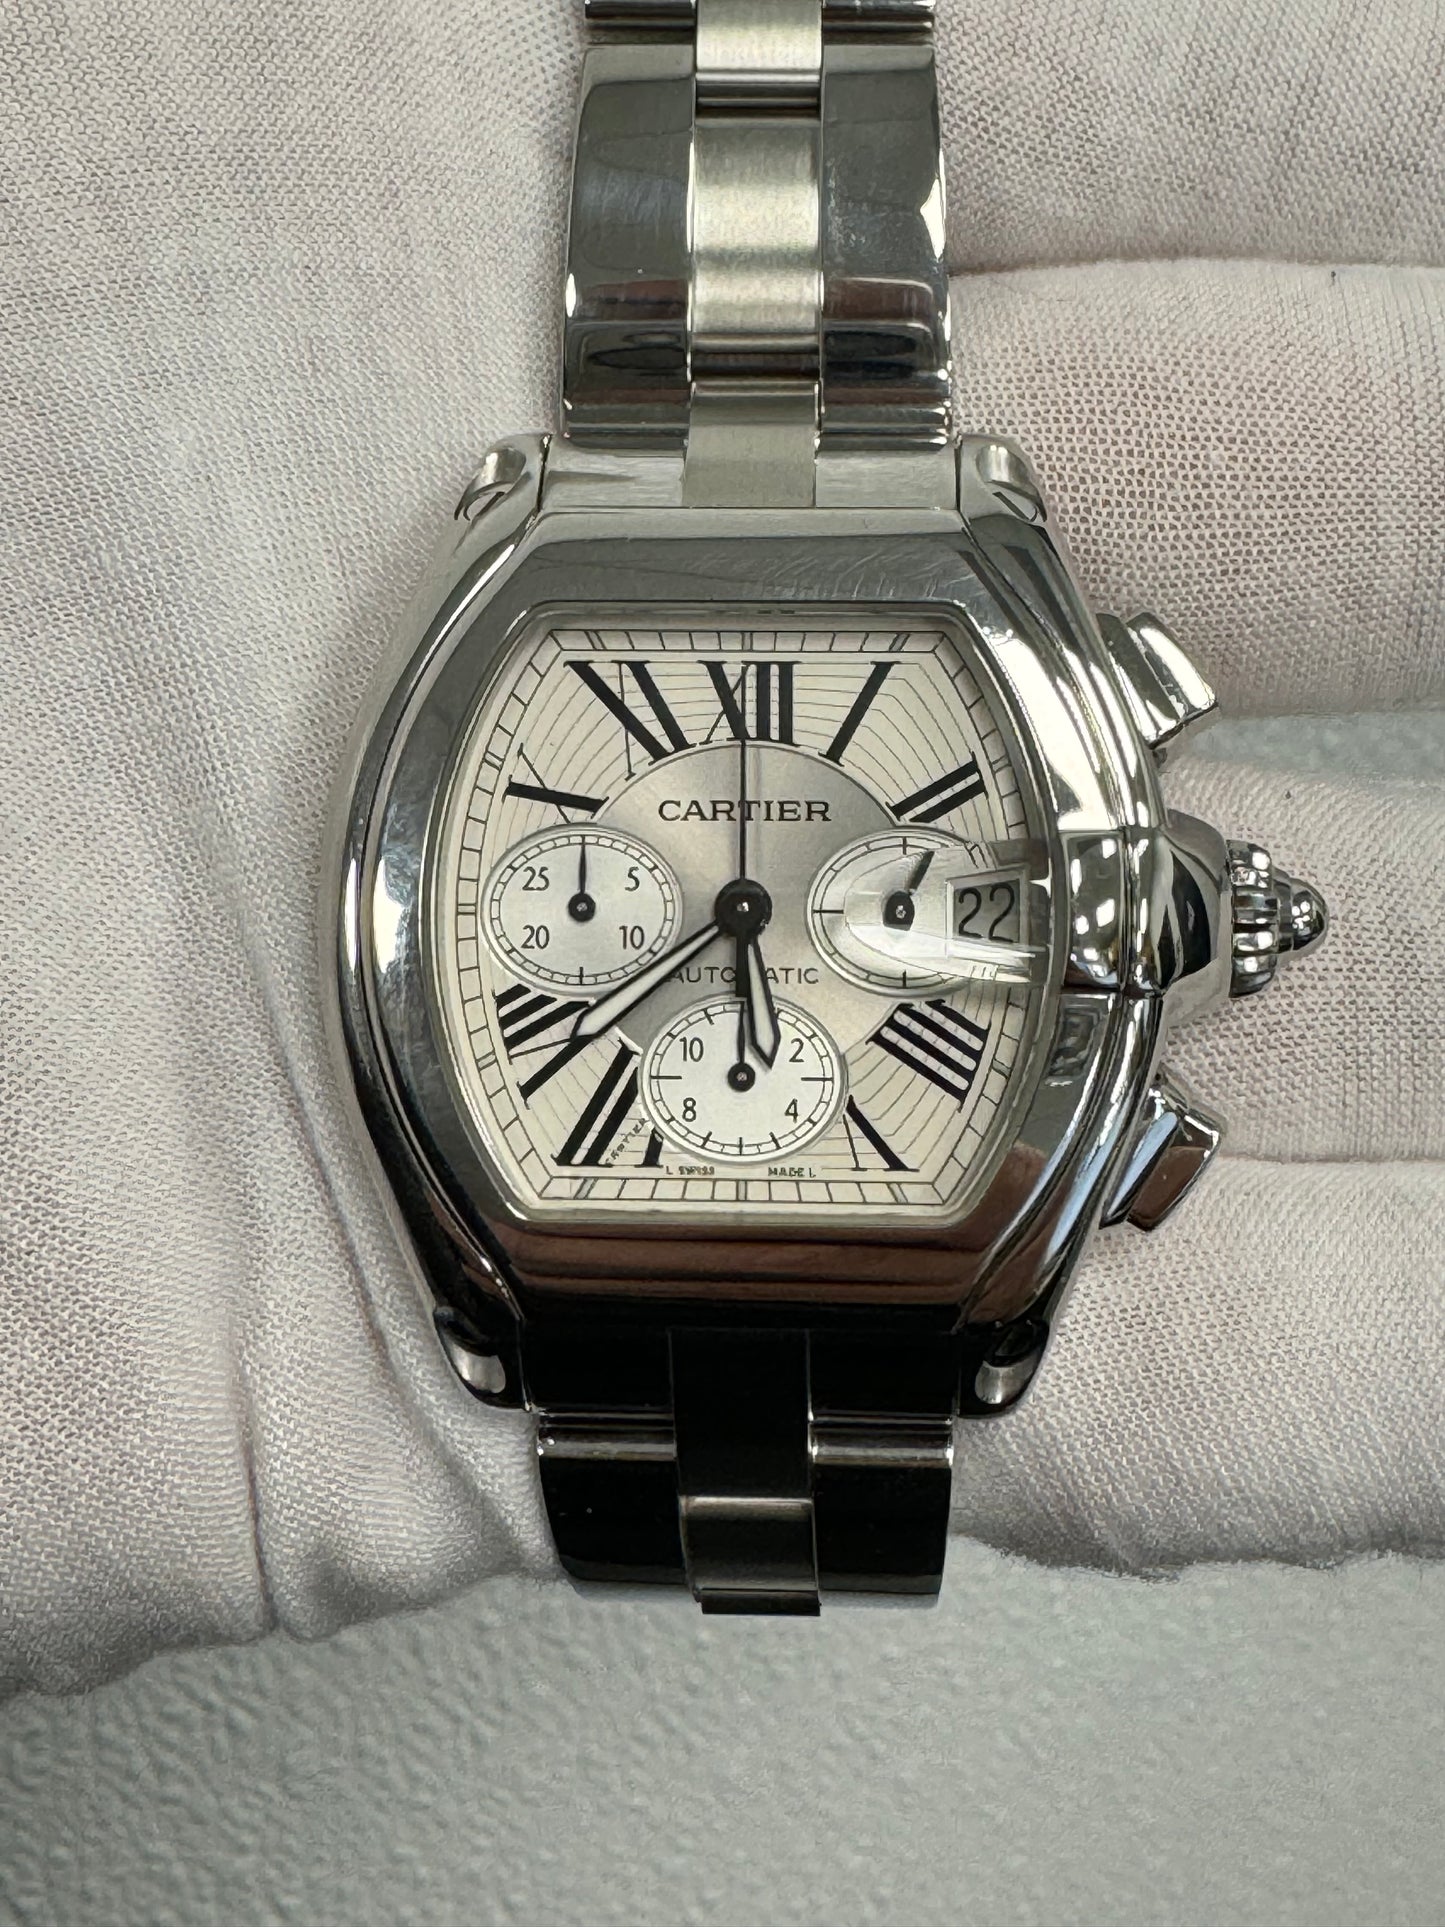 Cartier Roadster Chronograph Stainless Steel 38mm X 43mm Silver Chronograph Roman Dial Watch  Reference #: W62019X6 - Happy Jewelers Fine Jewelry Lifetime Warranty